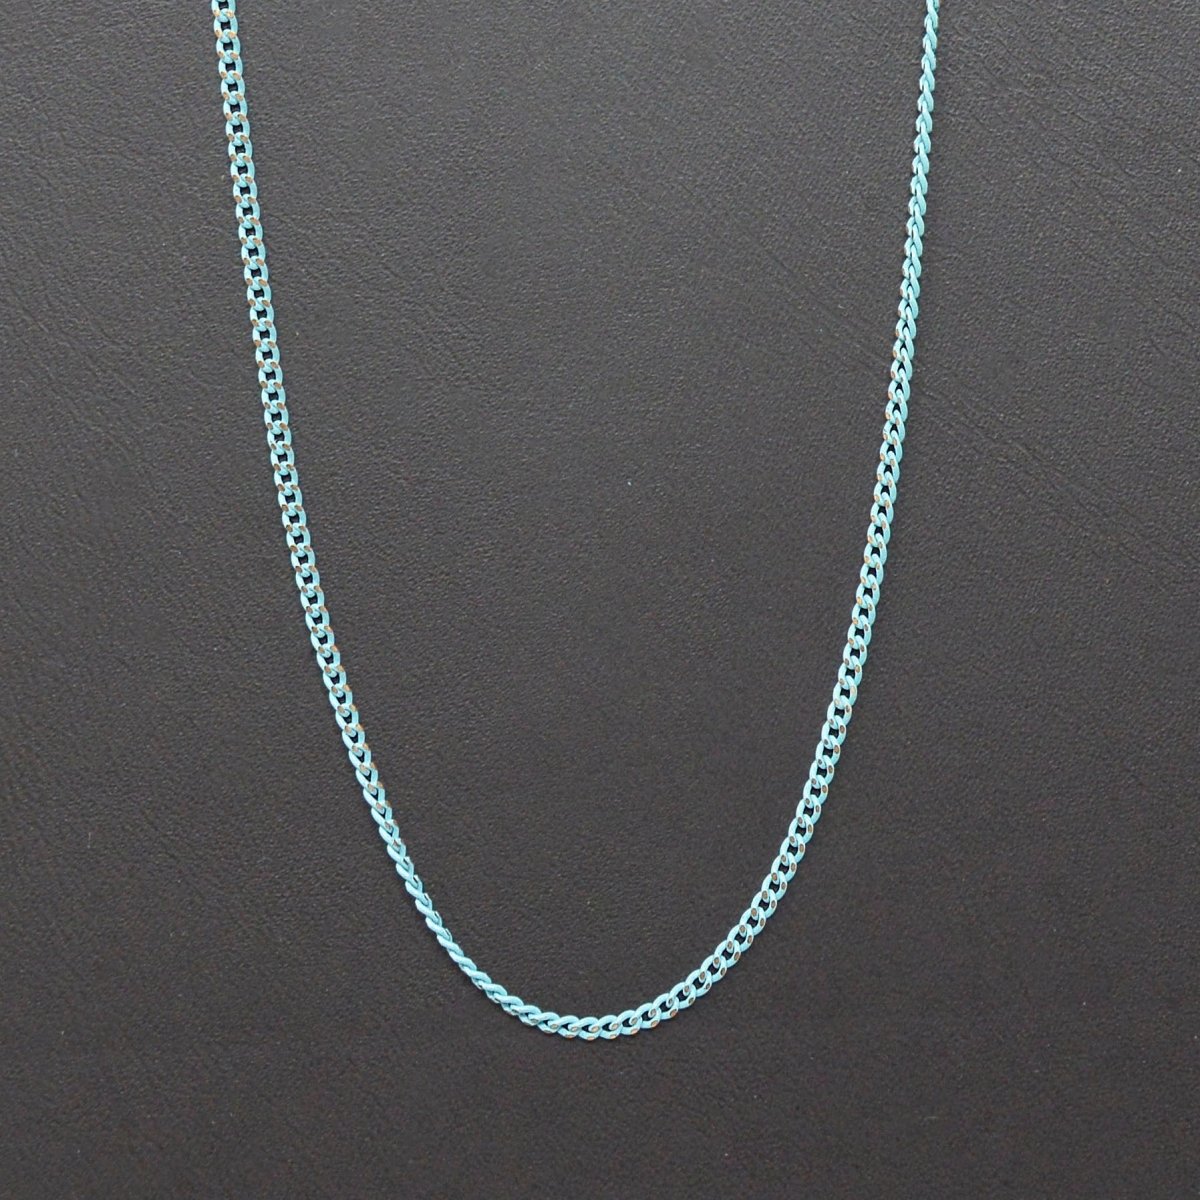 Blue Shimmer Curb Chain On Brass 1.8mm width Gold Teal Enamel Unfinished chain for Bracelet Necklace Component Chain | ROLL-443 Clearance Pricing - DLUXCA